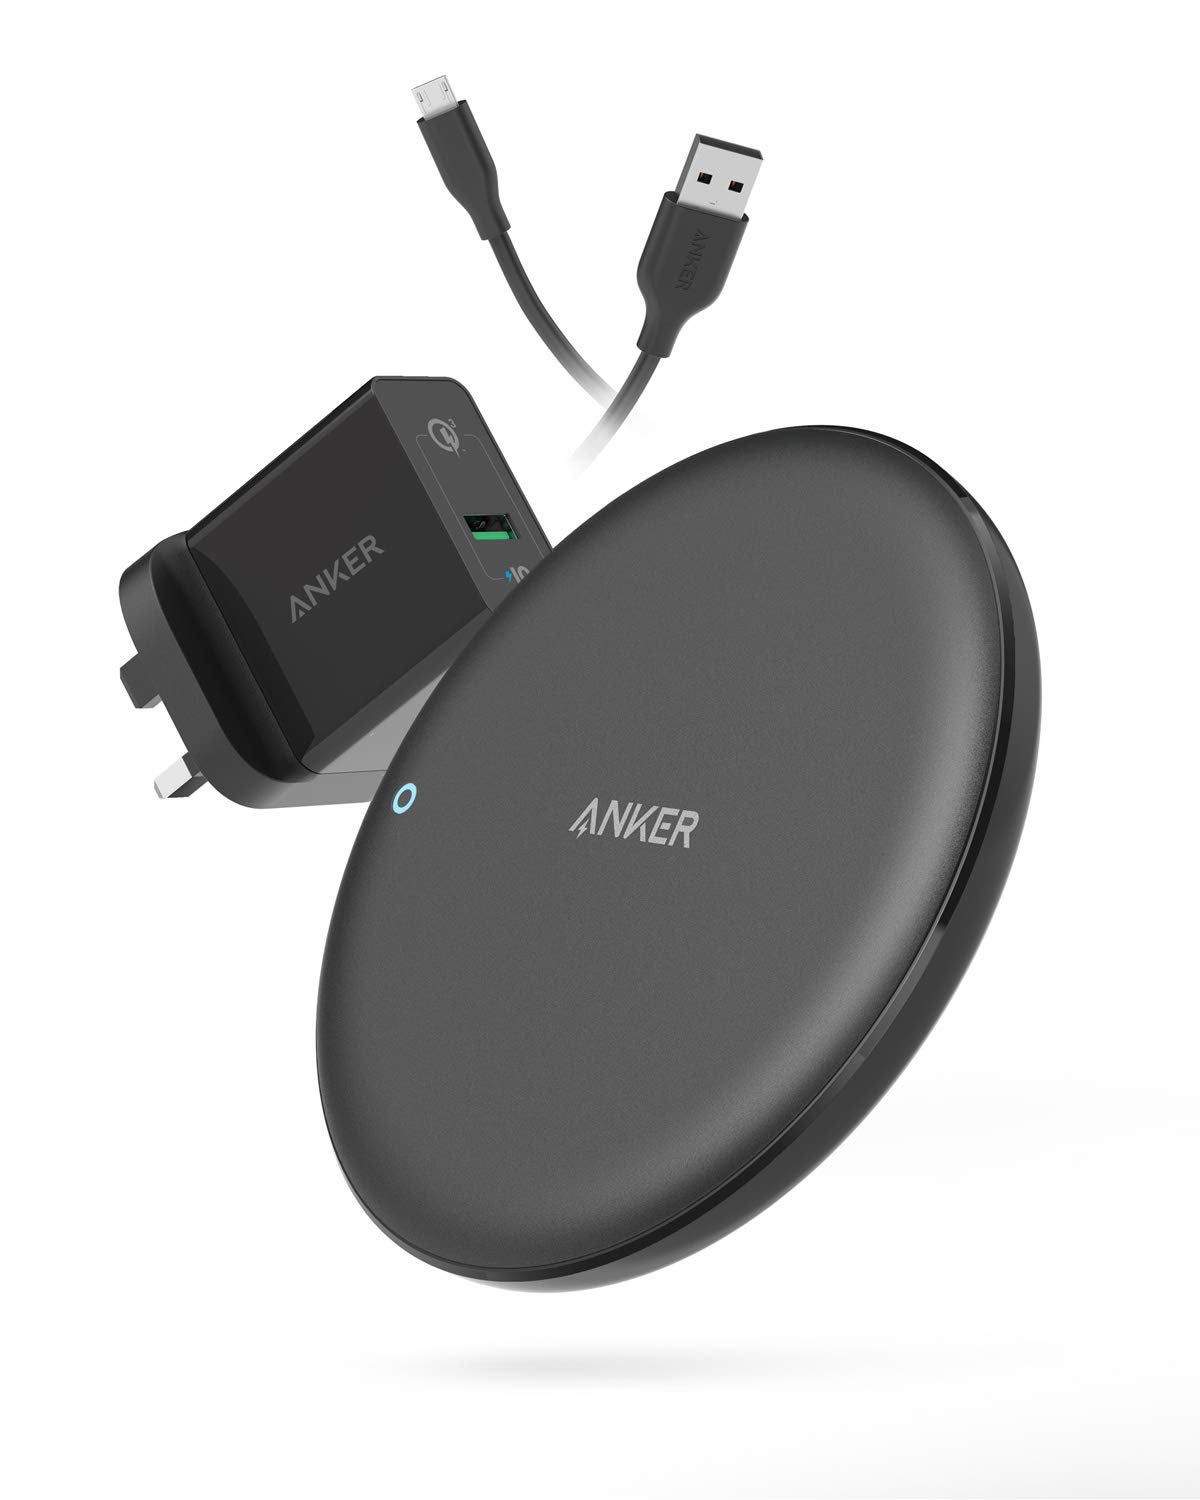 ANKER POWERWAVE 7.5 FAST WIRELESS CHARGING PAD WITH INTERNAL COOLING FAN